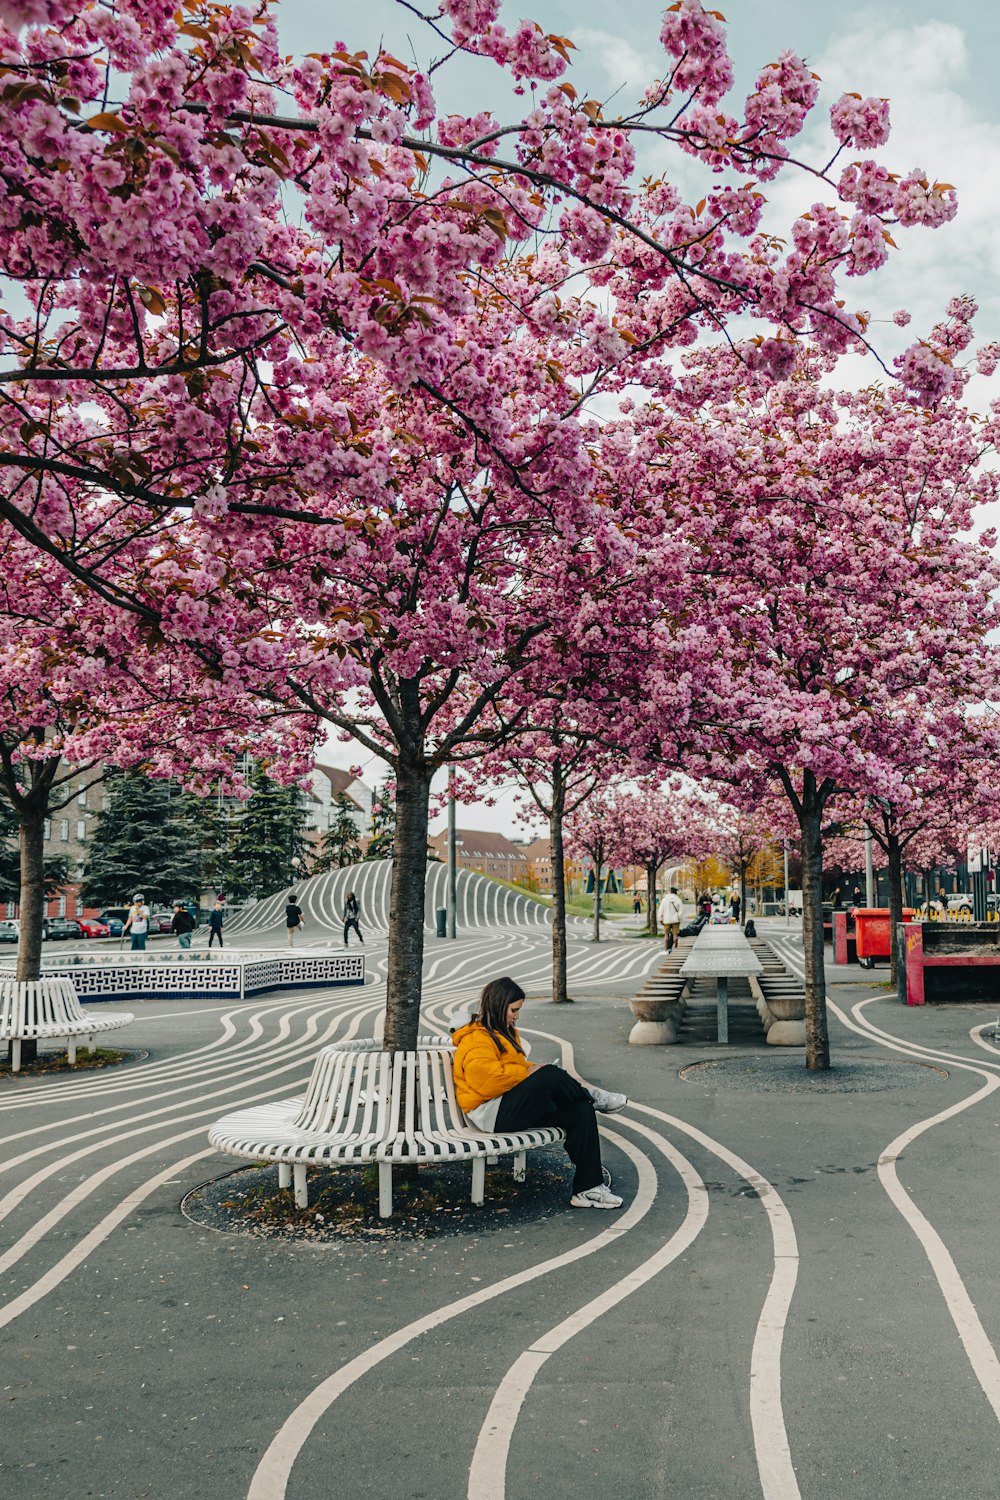 a person sitting on a bench under a tree with pink blossoms